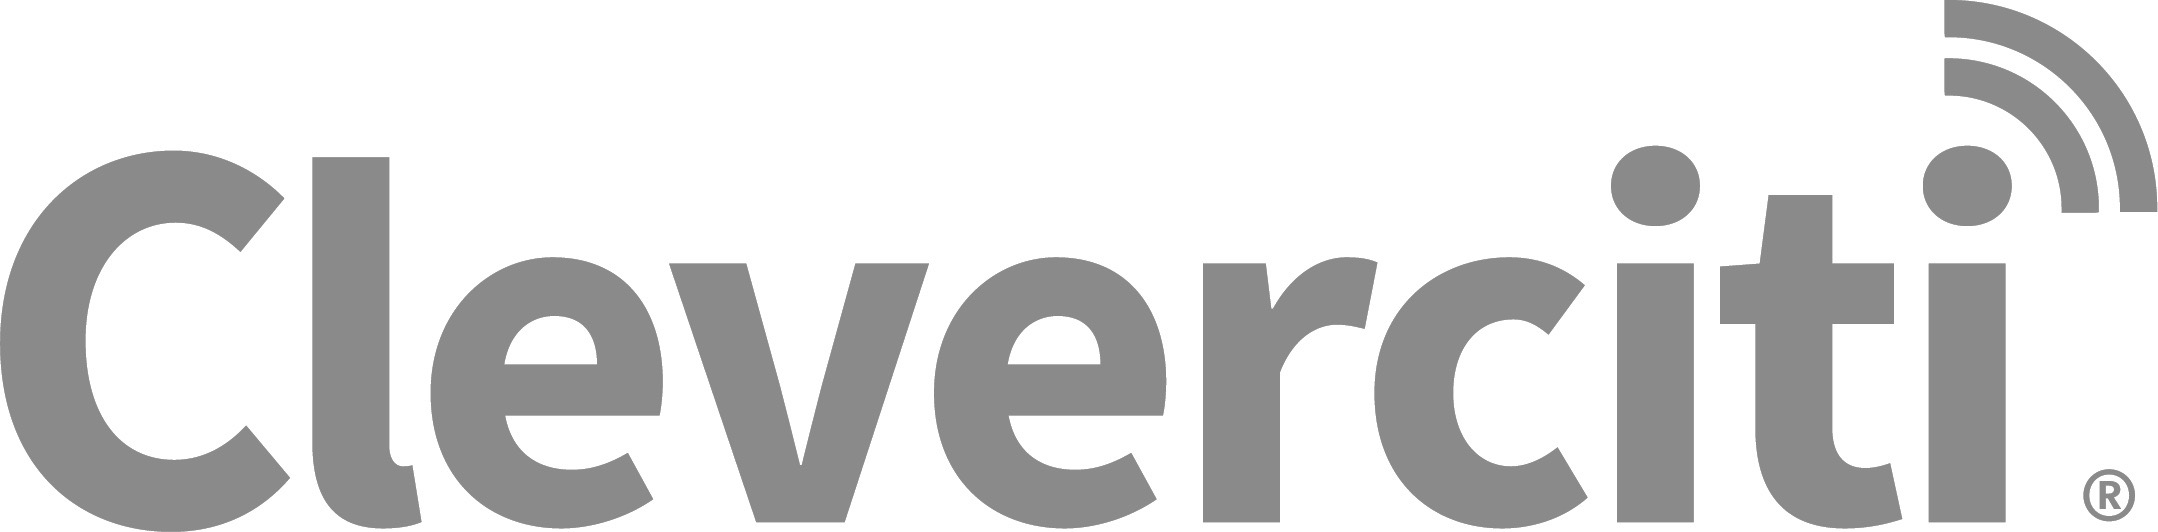 Logo of Cleverciti systems